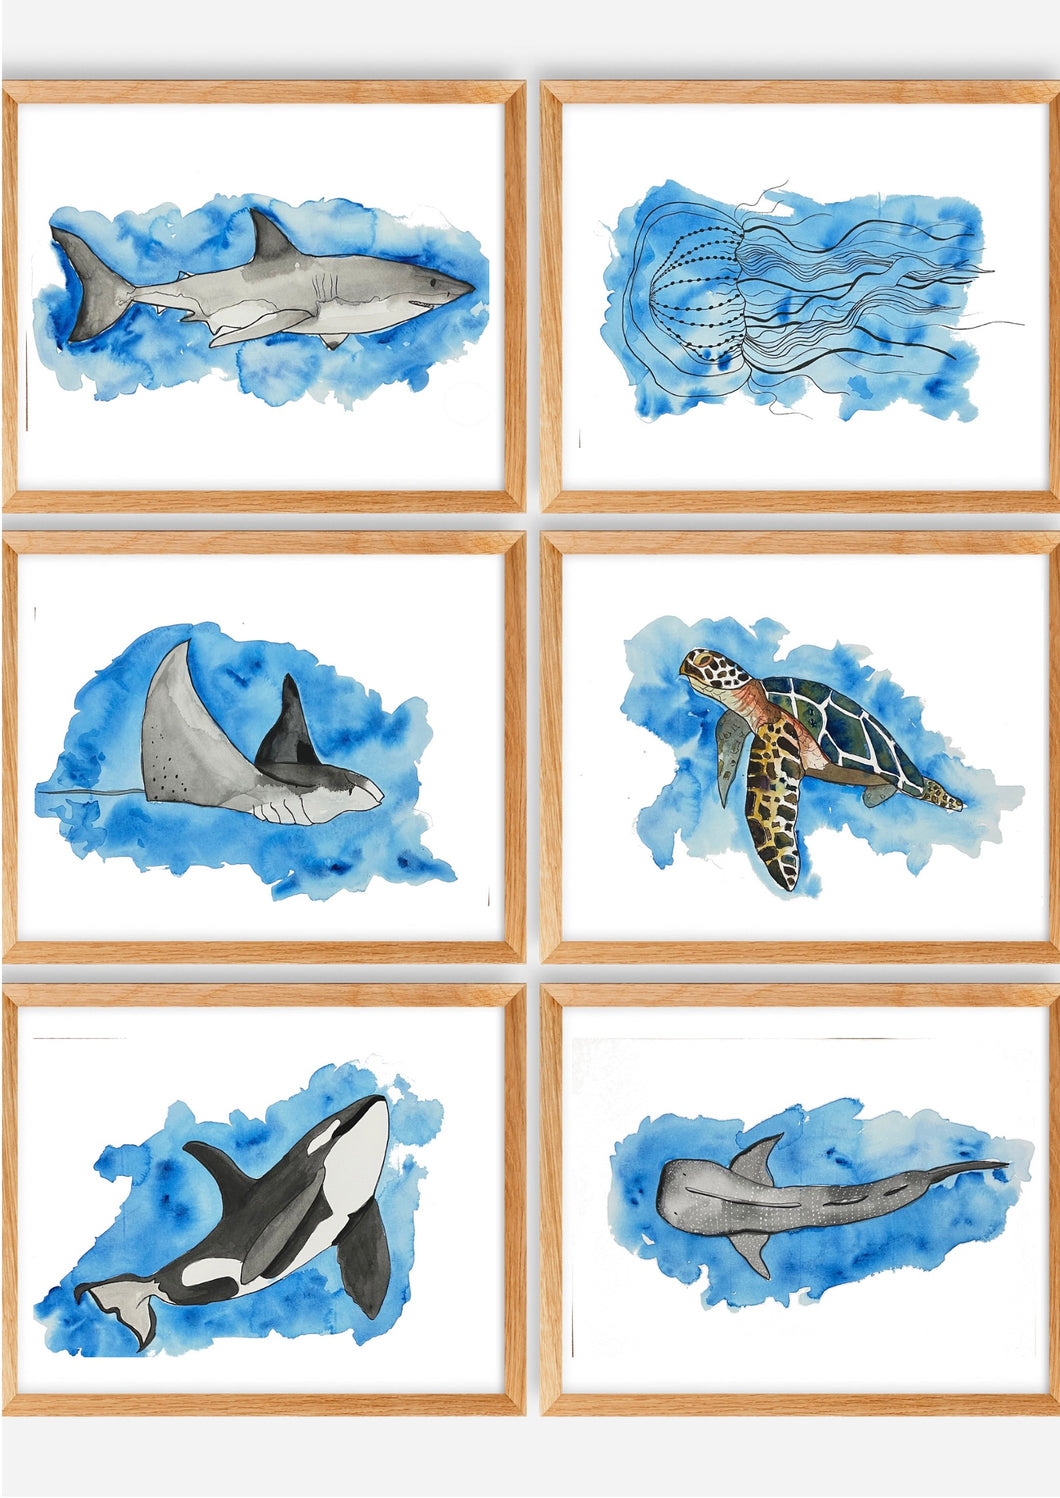 If you have a love for Marine animals, than these are the prints for you! These stunning wall prints are perfect as singles or sets of 3, 4, 5 and 6. The mix of soft and dark blues give a calming feel to each print.  The full set features a Shark, a Jellyfish, a Stingray, a Turtle, an Orca Whale and a Whaleshark.  These would be gorgeous in a child’s bedroom. Beautiful and educational all in one. 